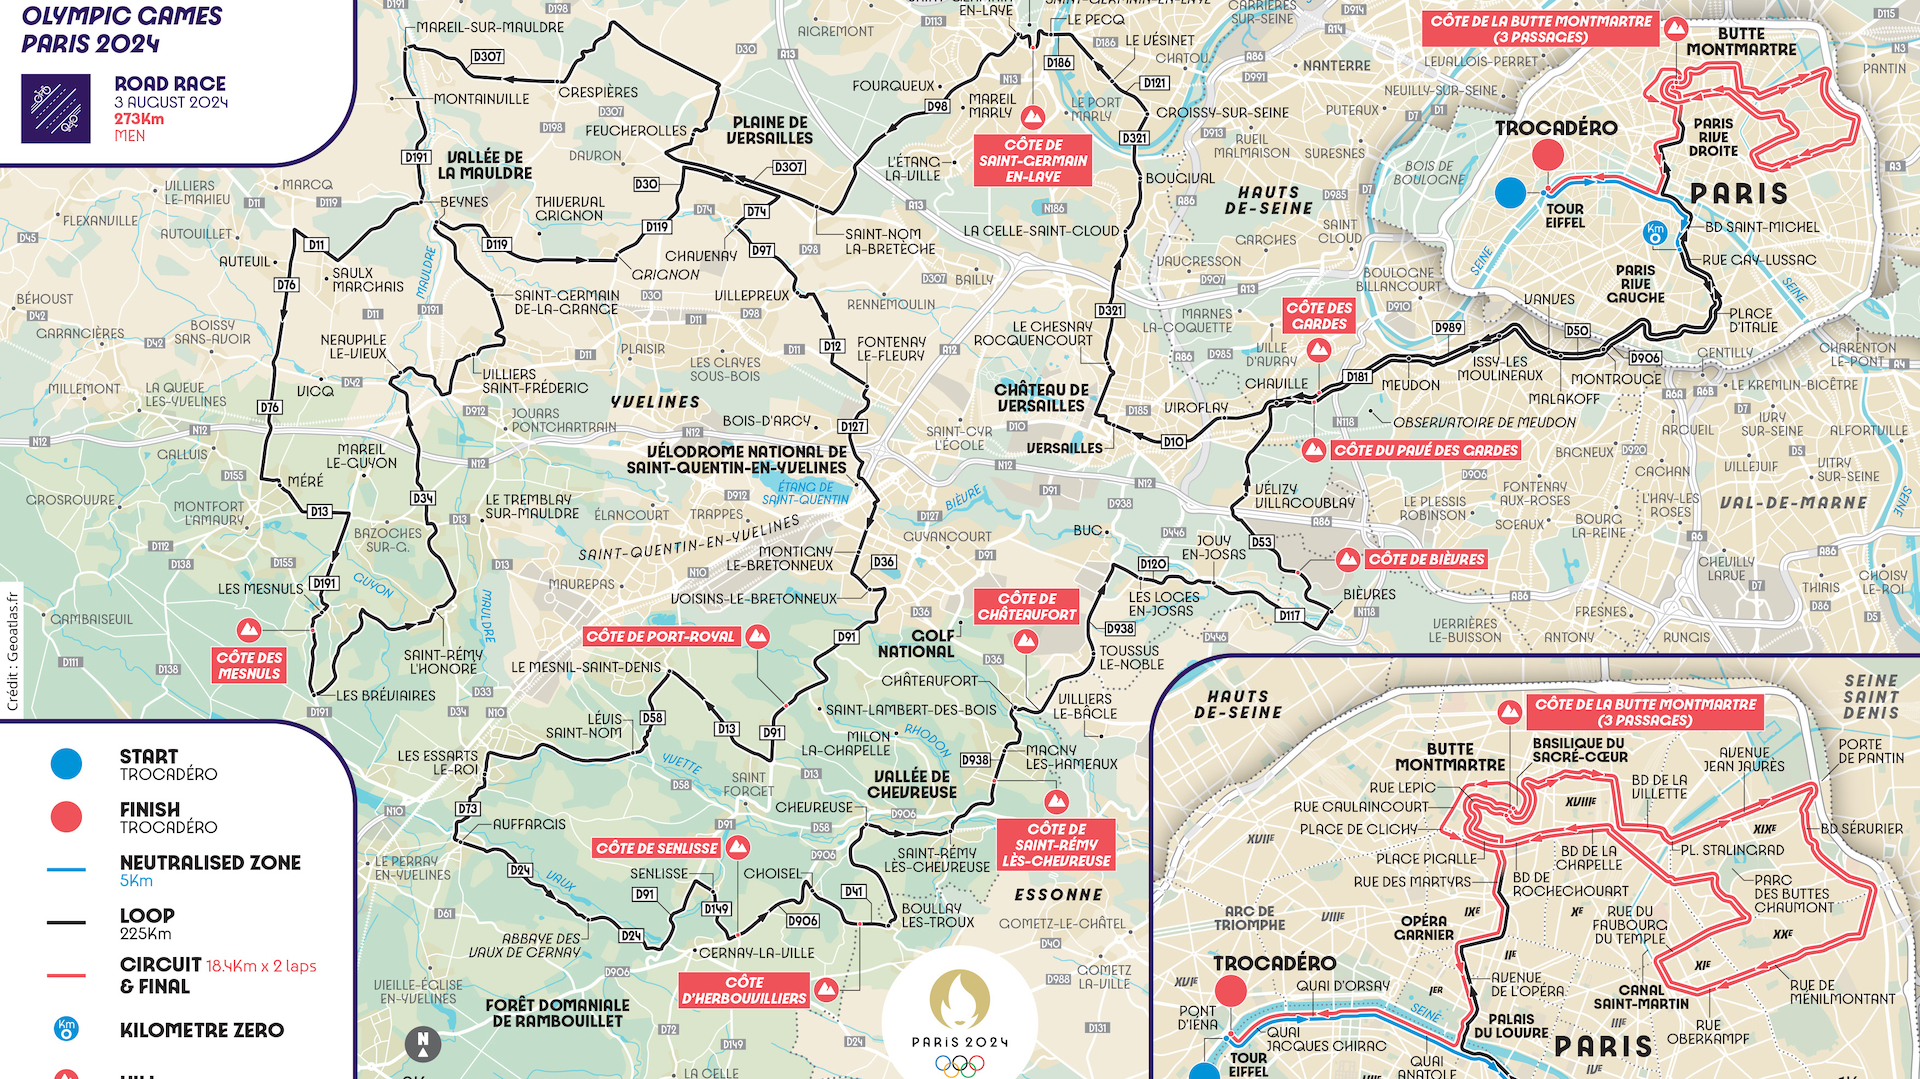 The route of the men's road race at the 2024 Paris Olympics. After a start in downtown Paris at the Trocadero, the race leaves Paris for a meandering set of loops through the Chevreuse Valley to the southwest before returning for an urban circuit over the Butte Montmarte.